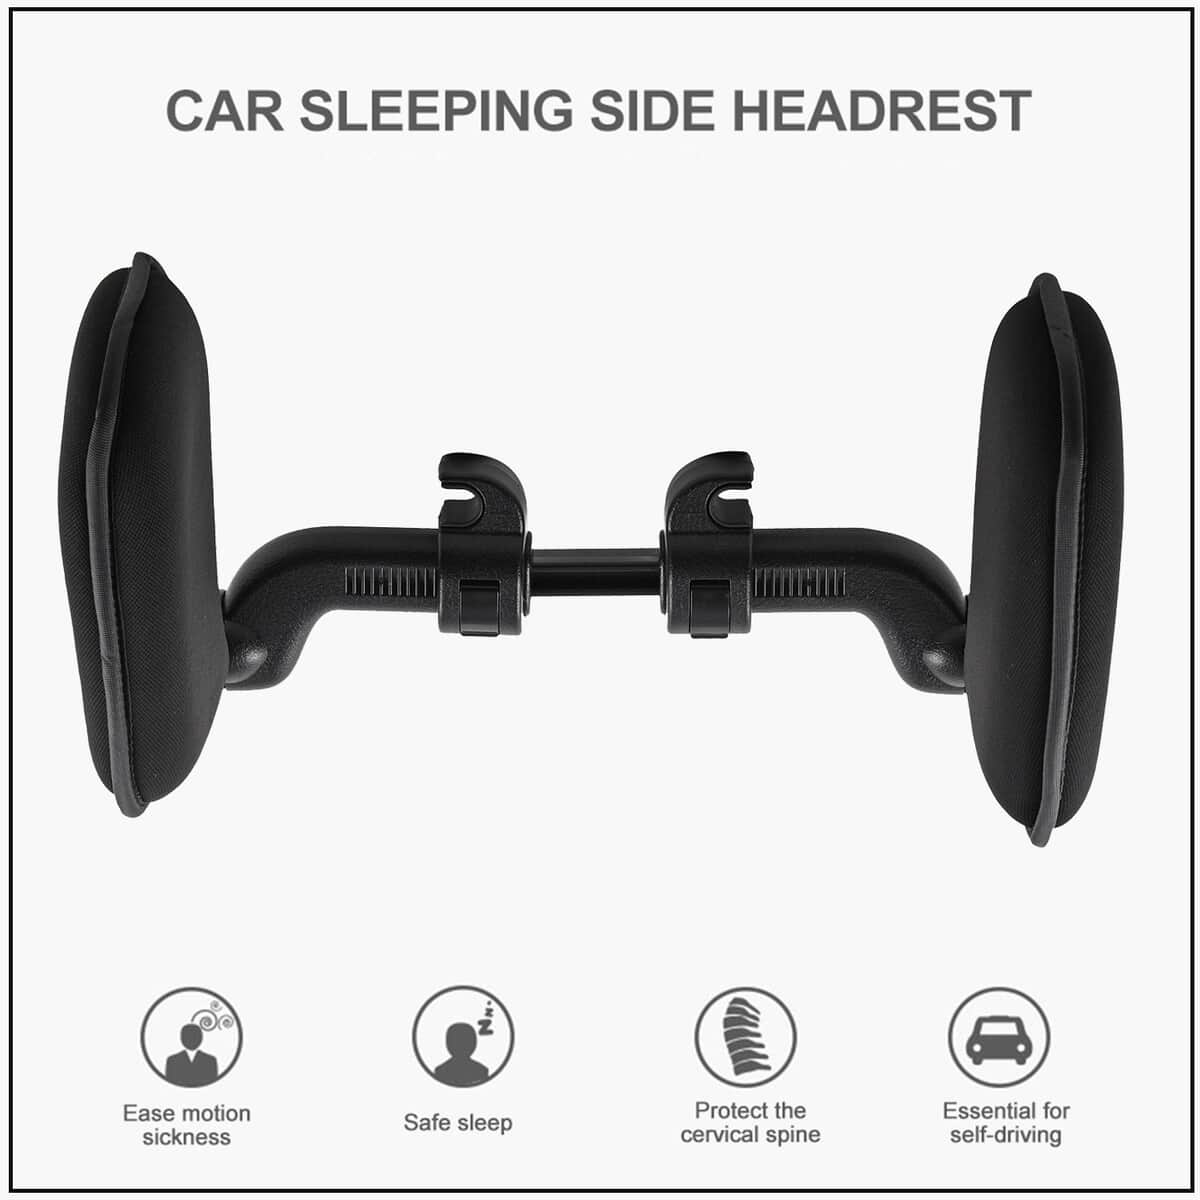 Black Car Sweat-resistant Sleeping Headrest with Side Wings, 180 Degree Adjustable Neck Rest Pillow, Soft Memory Foam, Mountable on Car Seat image number 4